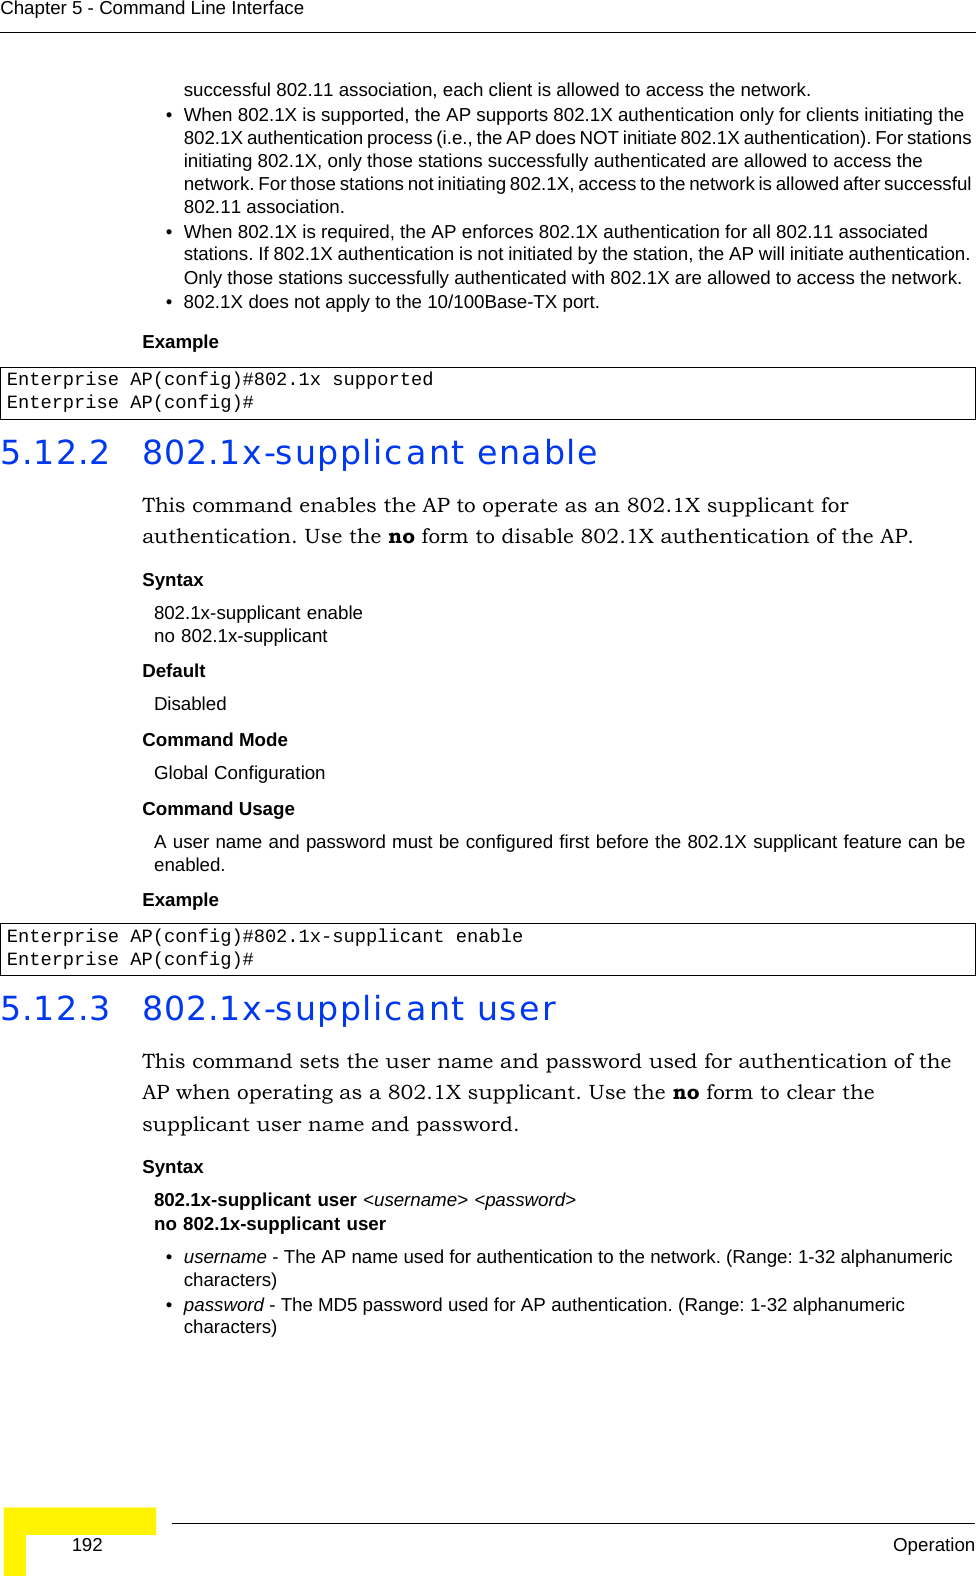  192 OperationChapter 5 - Command Line Interfacesuccessful 802.11 association, each client is allowed to access the network.• When 802.1X is supported, the AP supports 802.1X authentication only for clients initiating the 802.1X authentication process (i.e., the AP does NOT initiate 802.1X authentication). For stations initiating 802.1X, only those stations successfully authenticated are allowed to access the network. For those stations not initiating 802.1X, access to the network is allowed after successful 802.11 association.• When 802.1X is required, the AP enforces 802.1X authentication for all 802.11 associated stations. If 802.1X authentication is not initiated by the station, the AP will initiate authentication. Only those stations successfully authenticated with 802.1X are allowed to access the network.• 802.1X does not apply to the 10/100Base-TX port.Example5.12.2 802.1x-supplicant enableThis command enables the AP to operate as an 802.1X supplicant for authentication. Use the no form to disable 802.1X authentication of the AP.Syntax802.1x-supplicant enableno 802.1x-supplicantDefaultDisabledCommand ModeGlobal ConfigurationCommand UsageA user name and password must be configured first before the 802.1X supplicant feature can be enabled.Example5.12.3 802.1x-supplicant userThis command sets the user name and password used for authentication of the AP when operating as a 802.1X supplicant. Use the no form to clear the supplicant user name and password.Syntax802.1x-supplicant user &lt;username&gt; &lt;password&gt;no 802.1x-supplicant user•username - The AP name used for authentication to the network. (Range: 1-32 alphanumeric characters)•password - The MD5 password used for AP authentication. (Range: 1-32 alphanumeric characters)Enterprise AP(config)#802.1x supportedEnterprise AP(config)#Enterprise AP(config)#802.1x-supplicant enableEnterprise AP(config)#